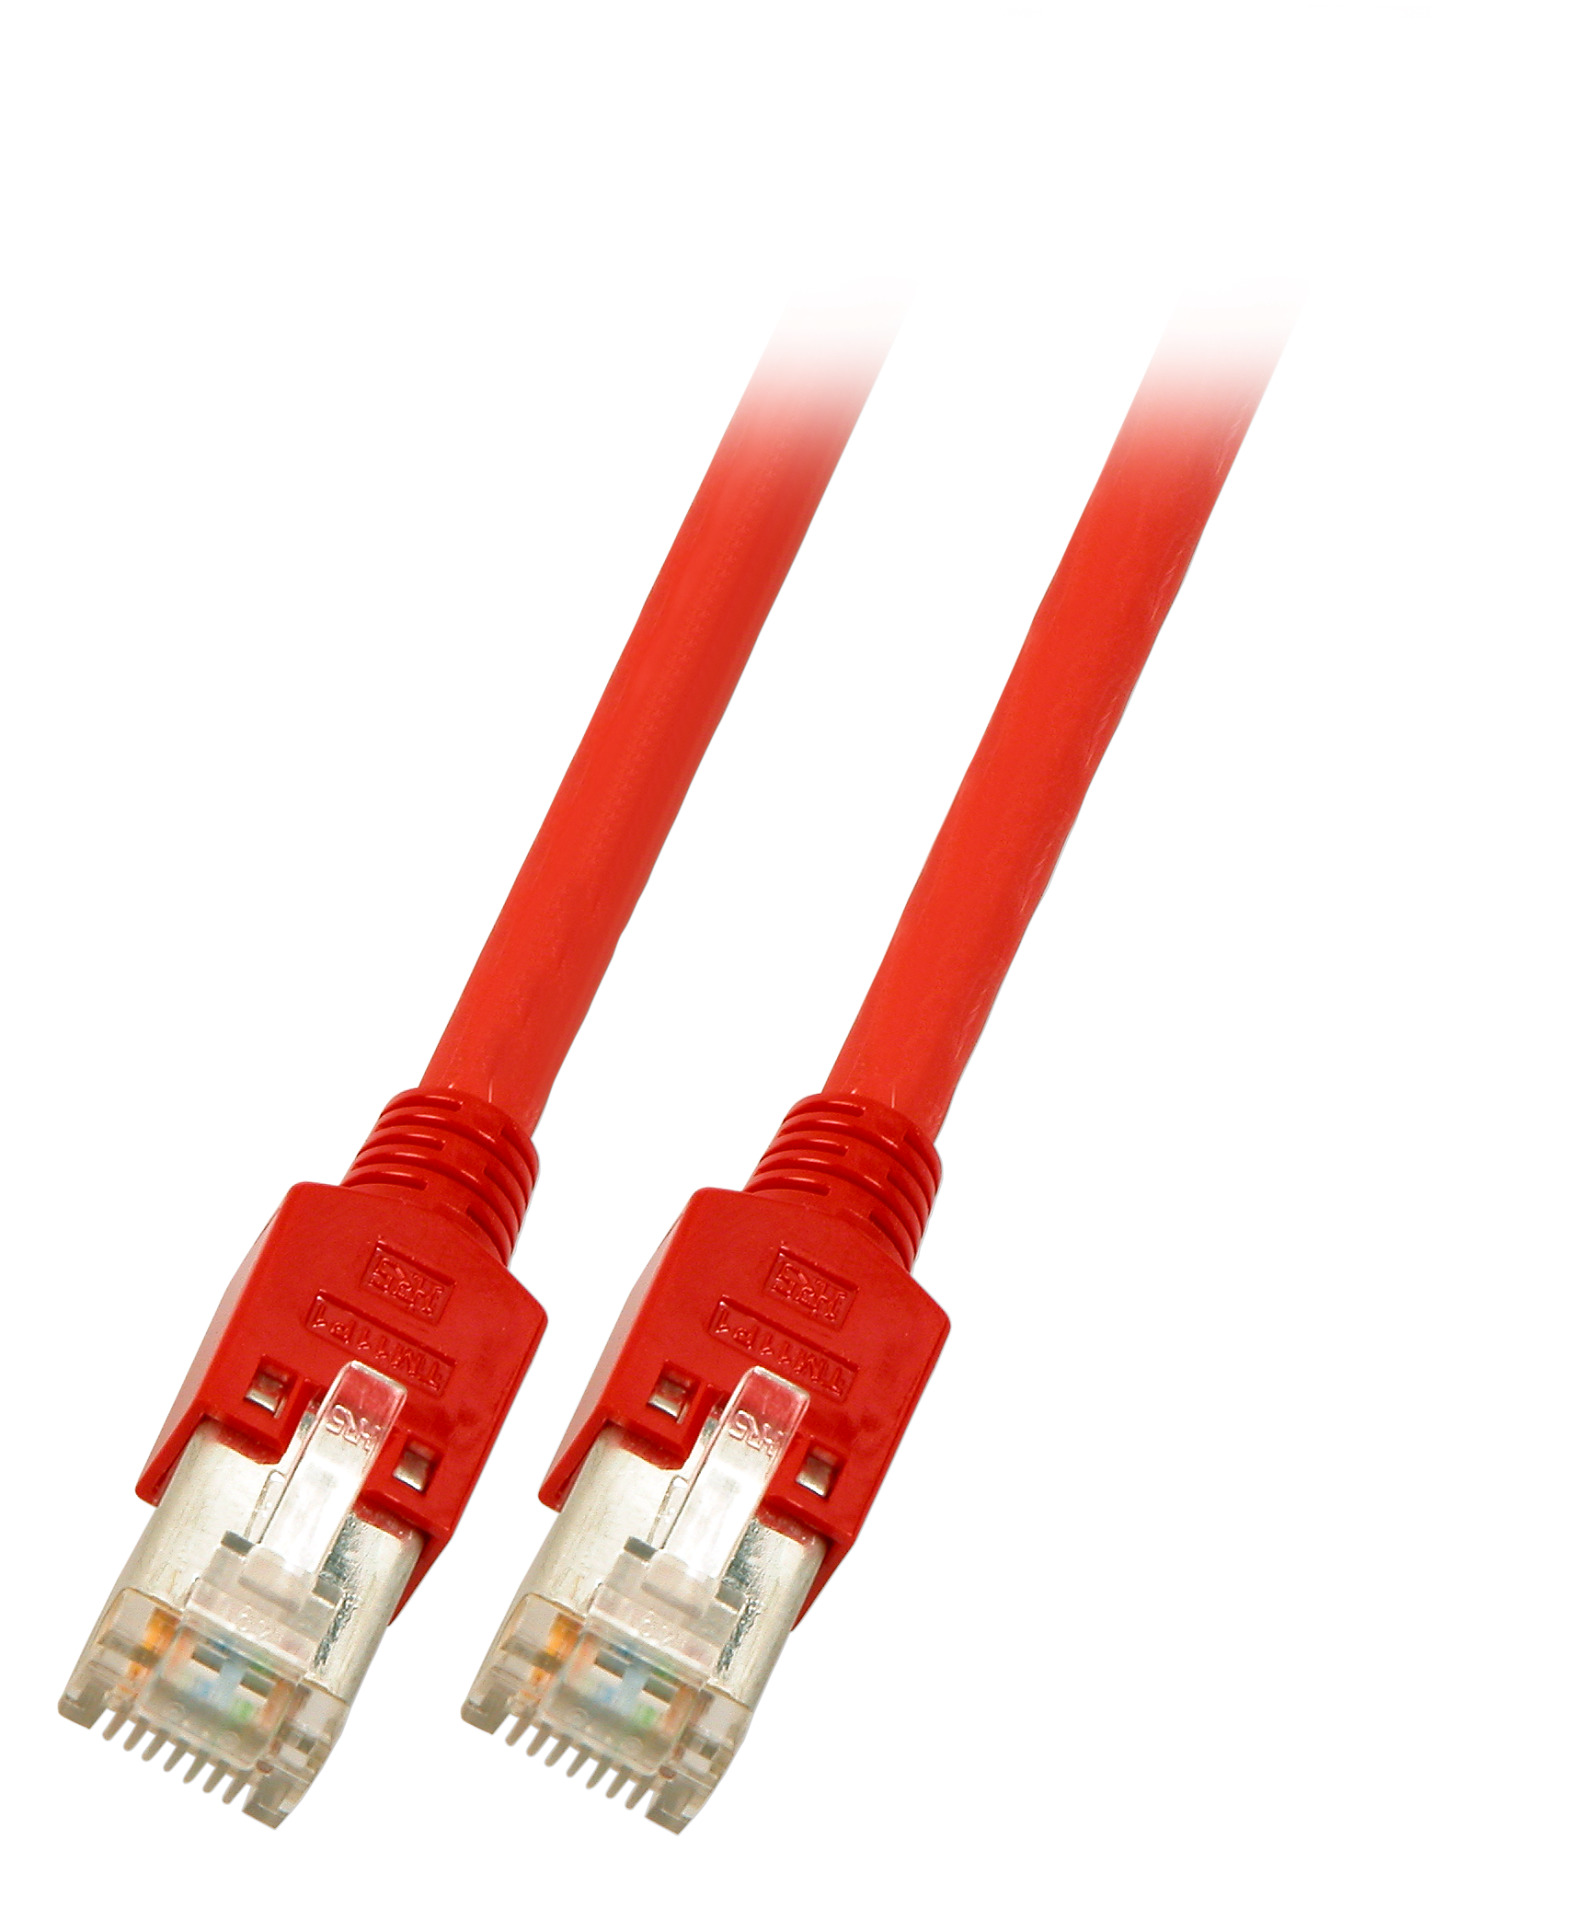 RJ45 Crossover Patch cable SF/UTP, Cat.5e, TM11, UC300, 0,5m, red